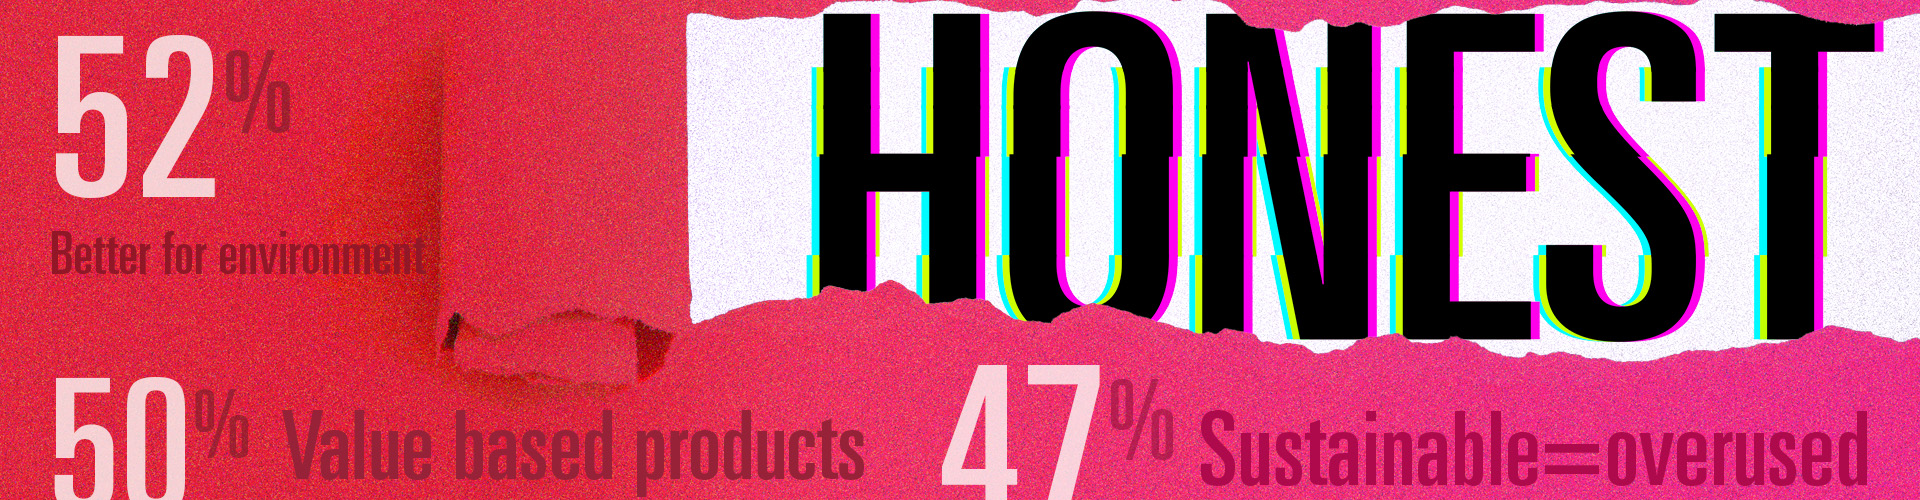 Pink and red banner featuring statistics on what shoppers want retailers to be honest about